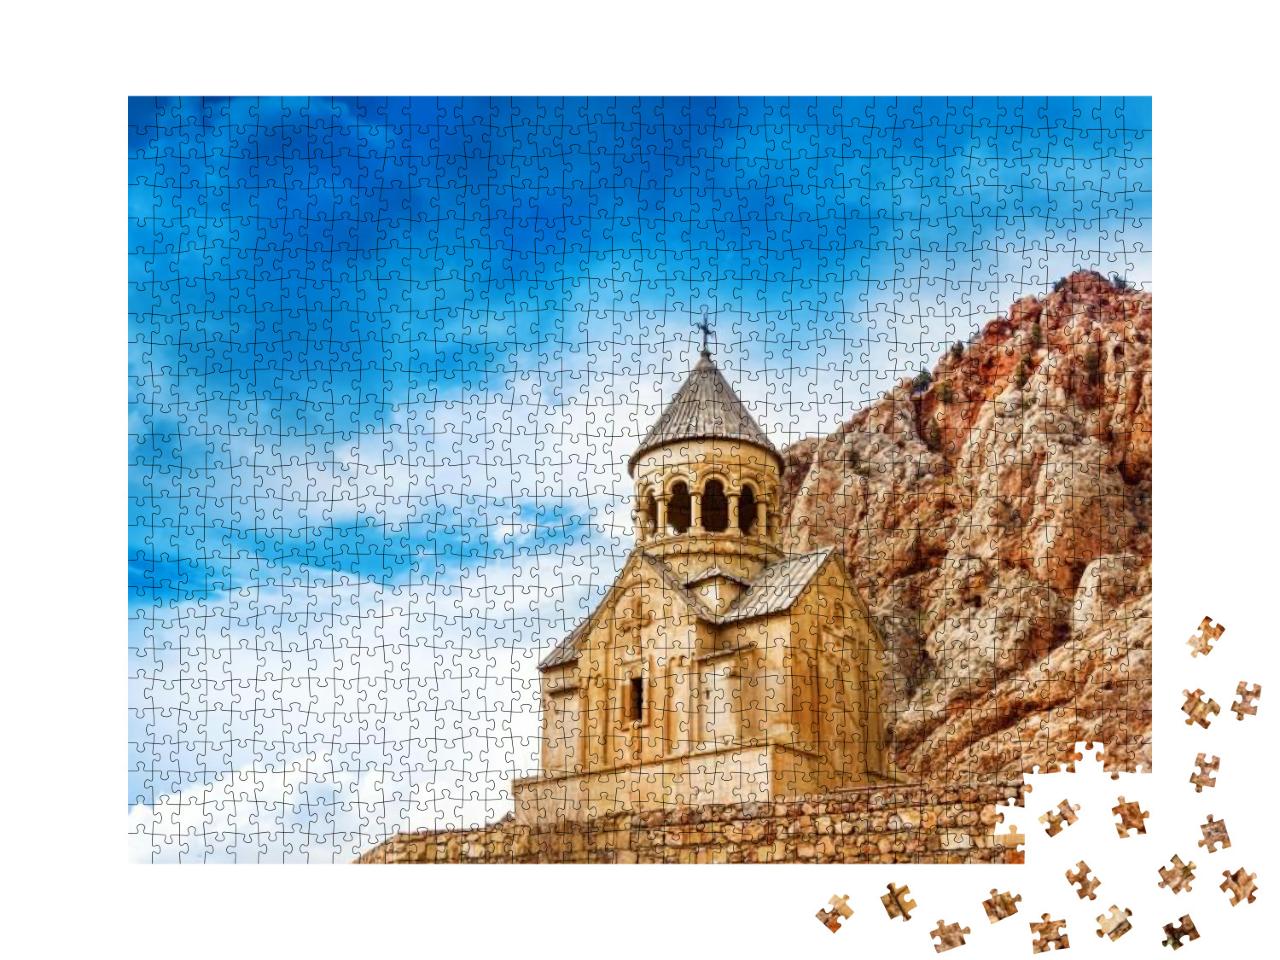 Scenic Noravank Monastery in Armenia. Against Dramatic Sk... Jigsaw Puzzle with 1000 pieces